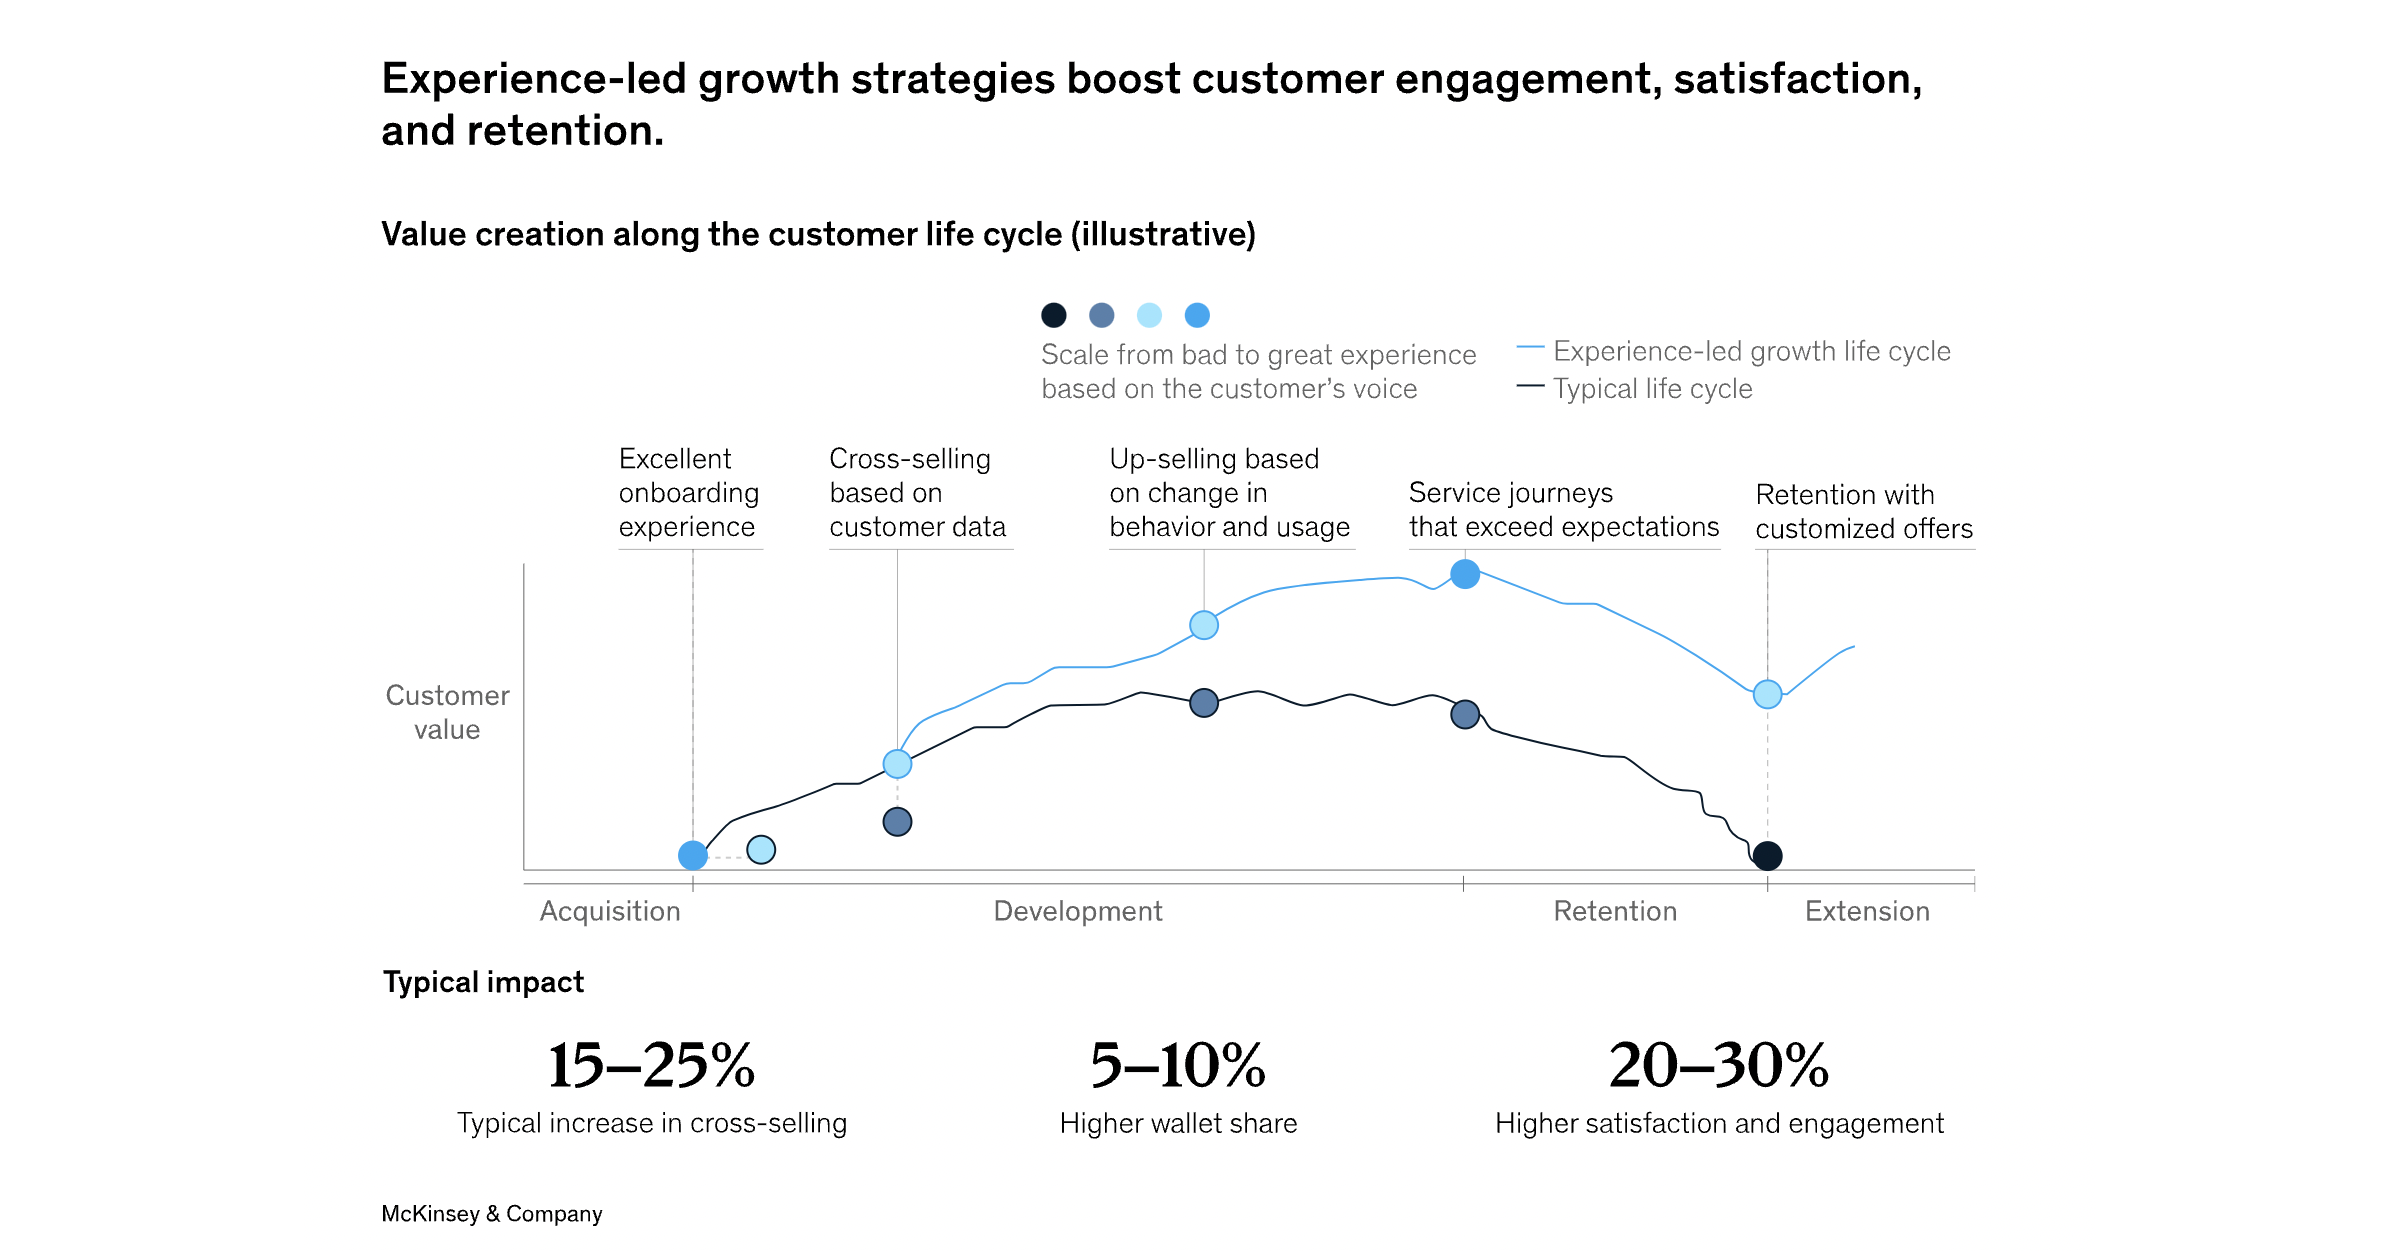 Experienced-led growth strategy could increase customer satisfaction and engagement by 20-30%